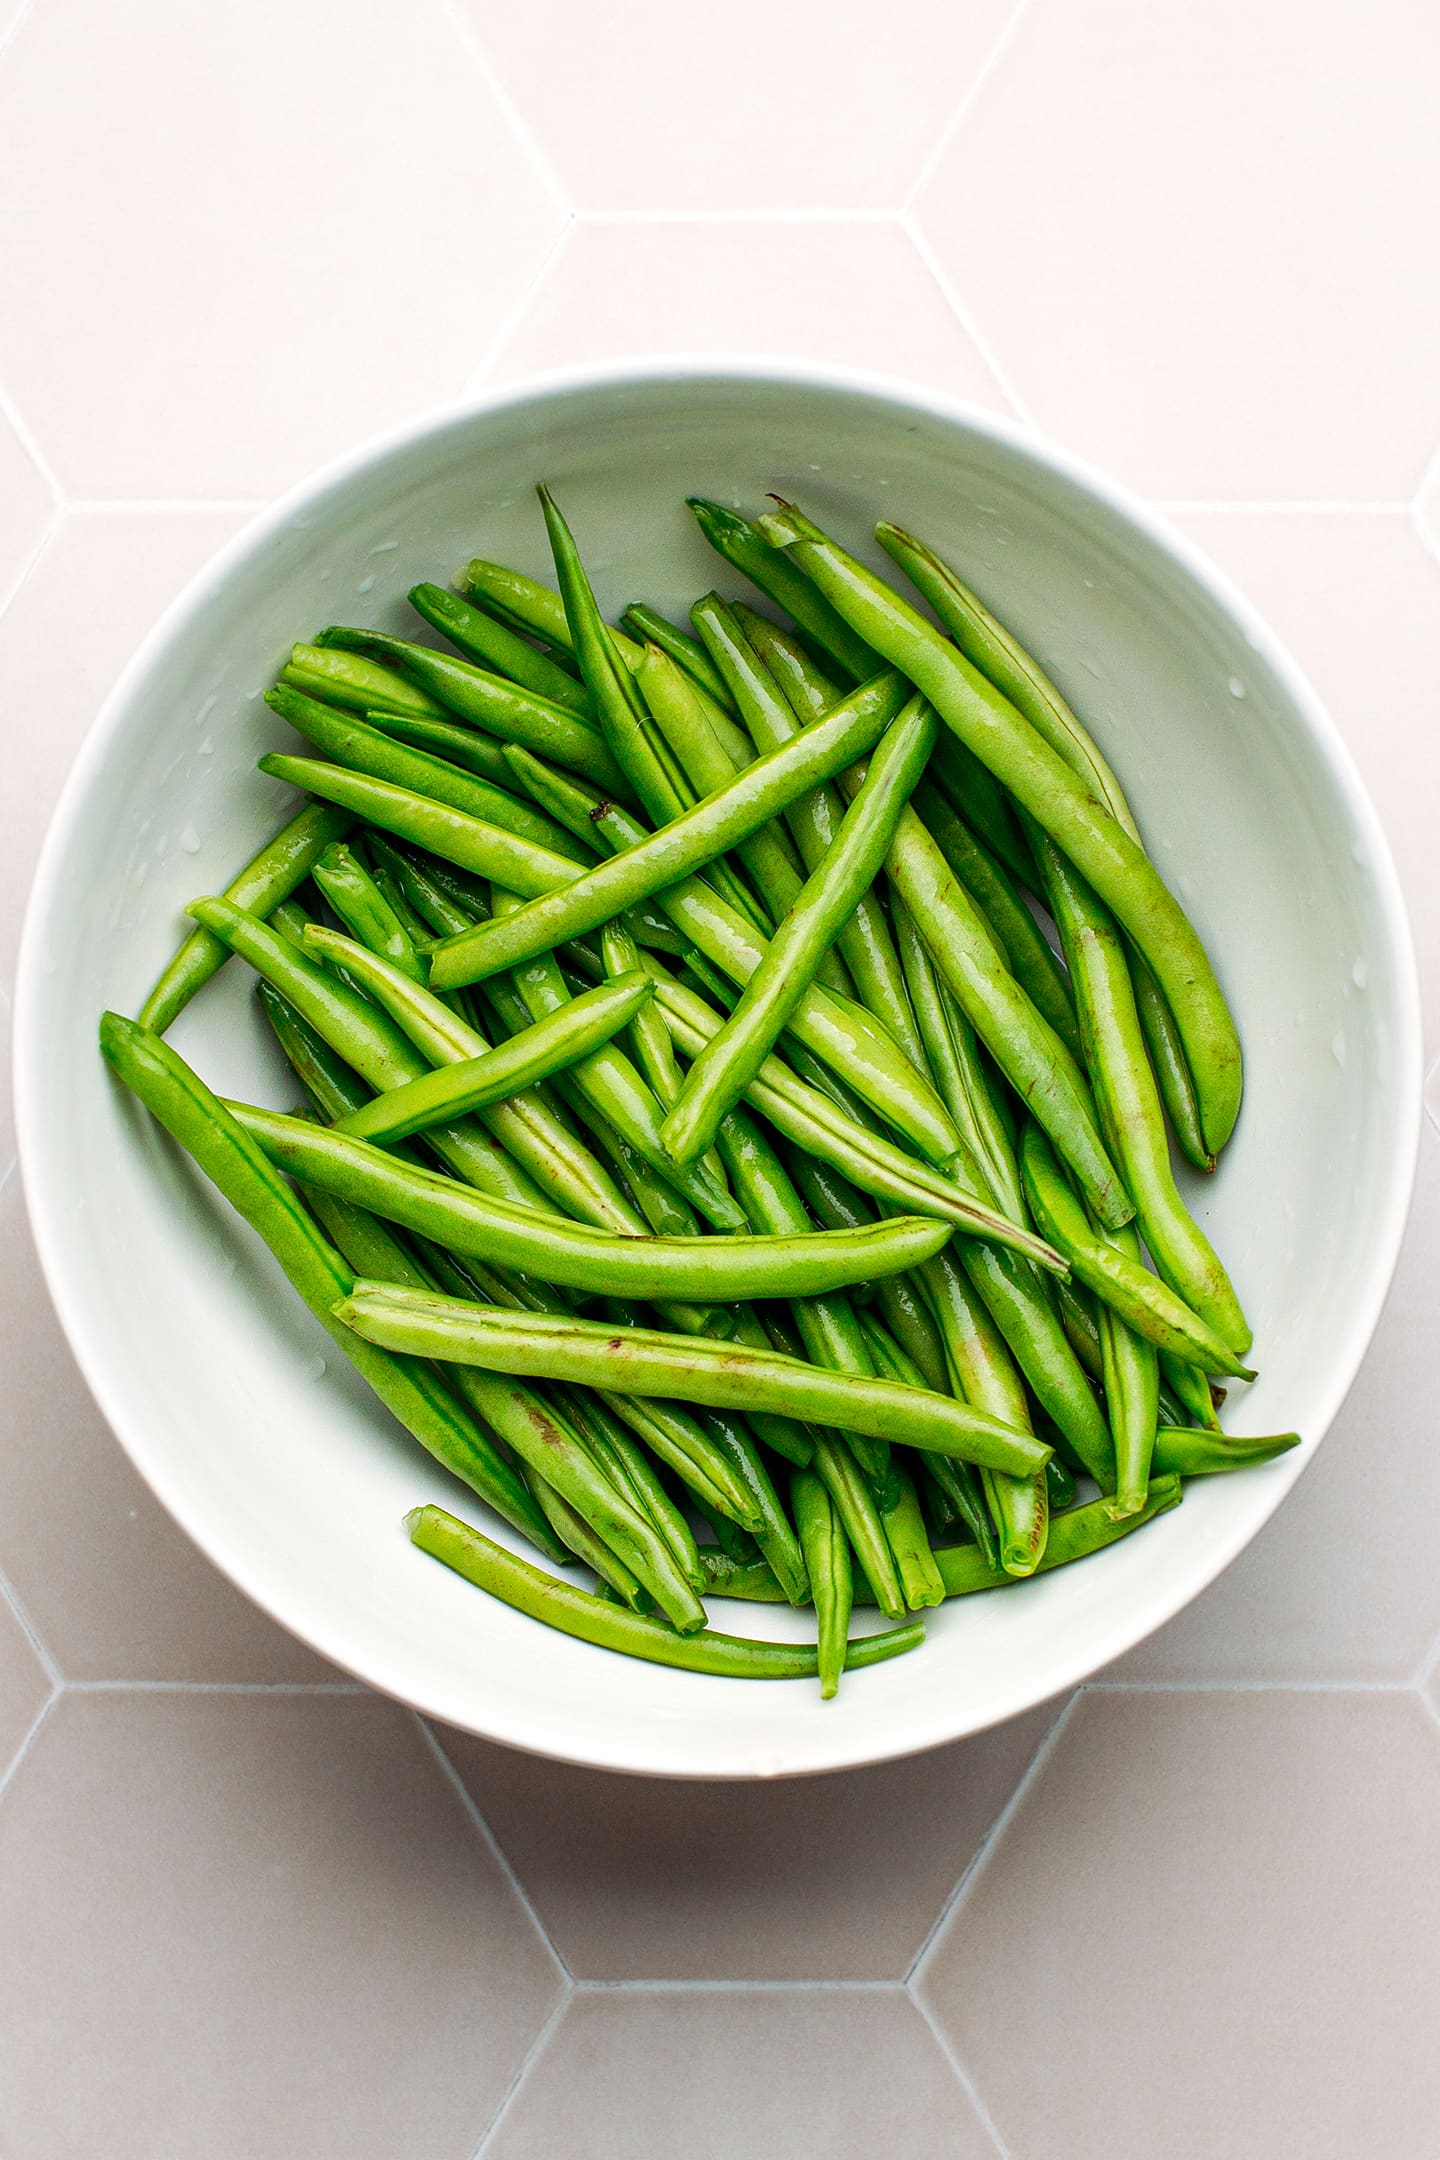 Drained green beans in a mixing bowl.